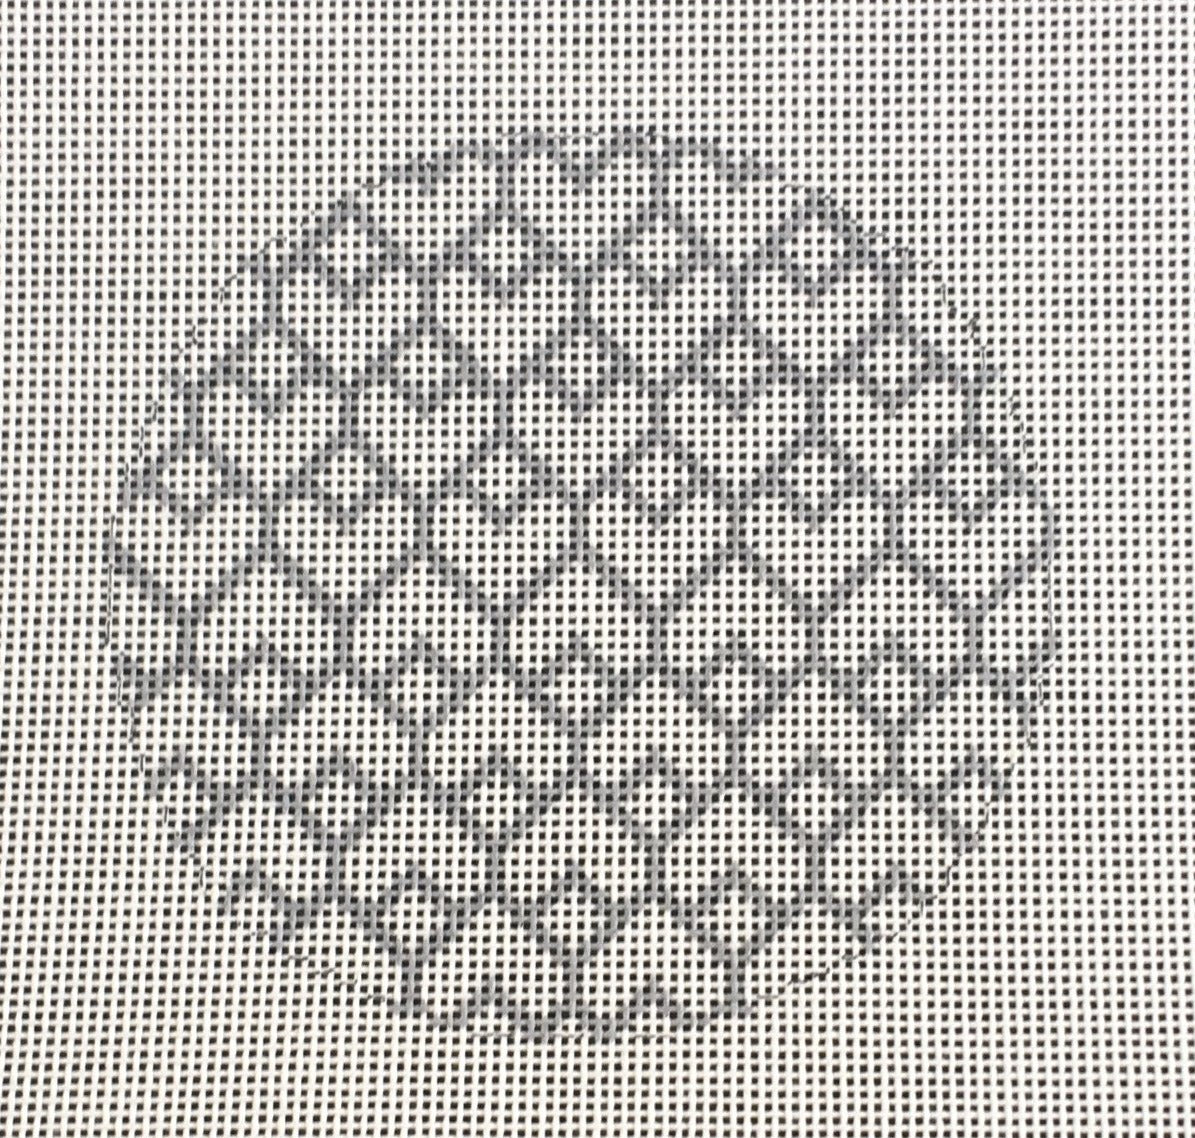 Susan Roberts round needlepoint canvas of interlocking hearts painted in grey sized for self-finishing boxes (insert) - color is customizable